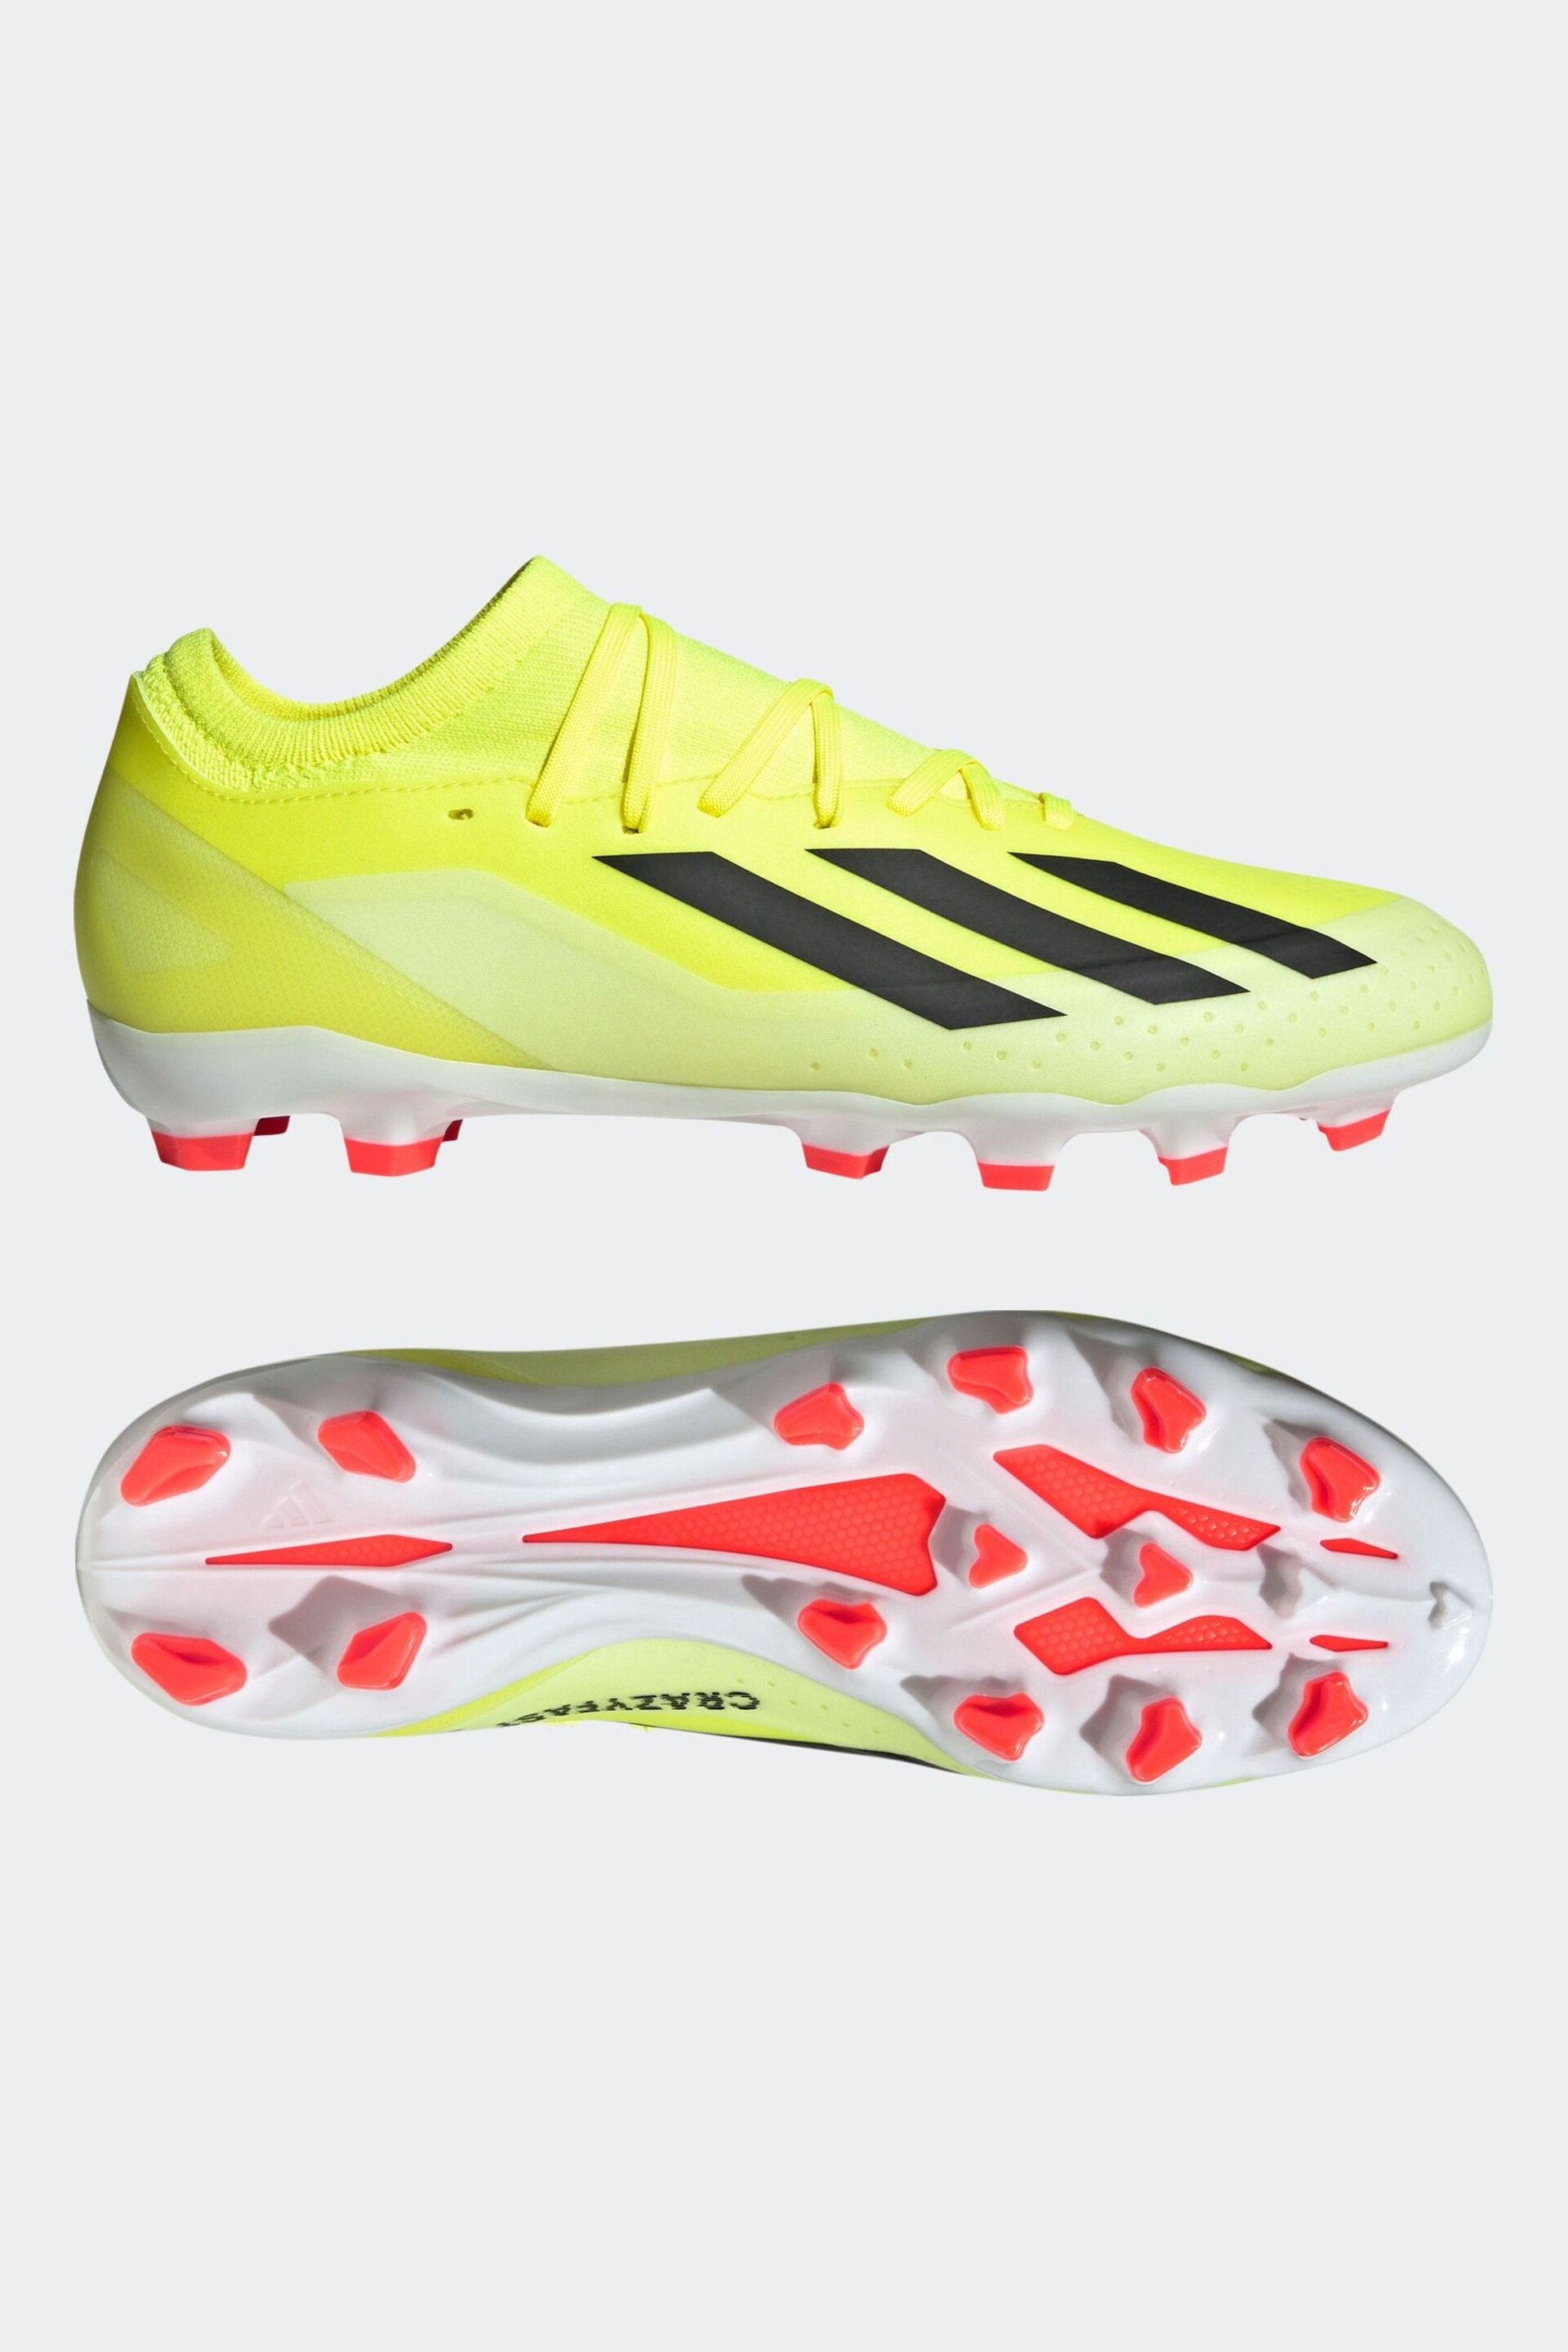 adidas Yellow Football X Crazyfast League Multi-Ground Adult Boots - Image 5 of 9